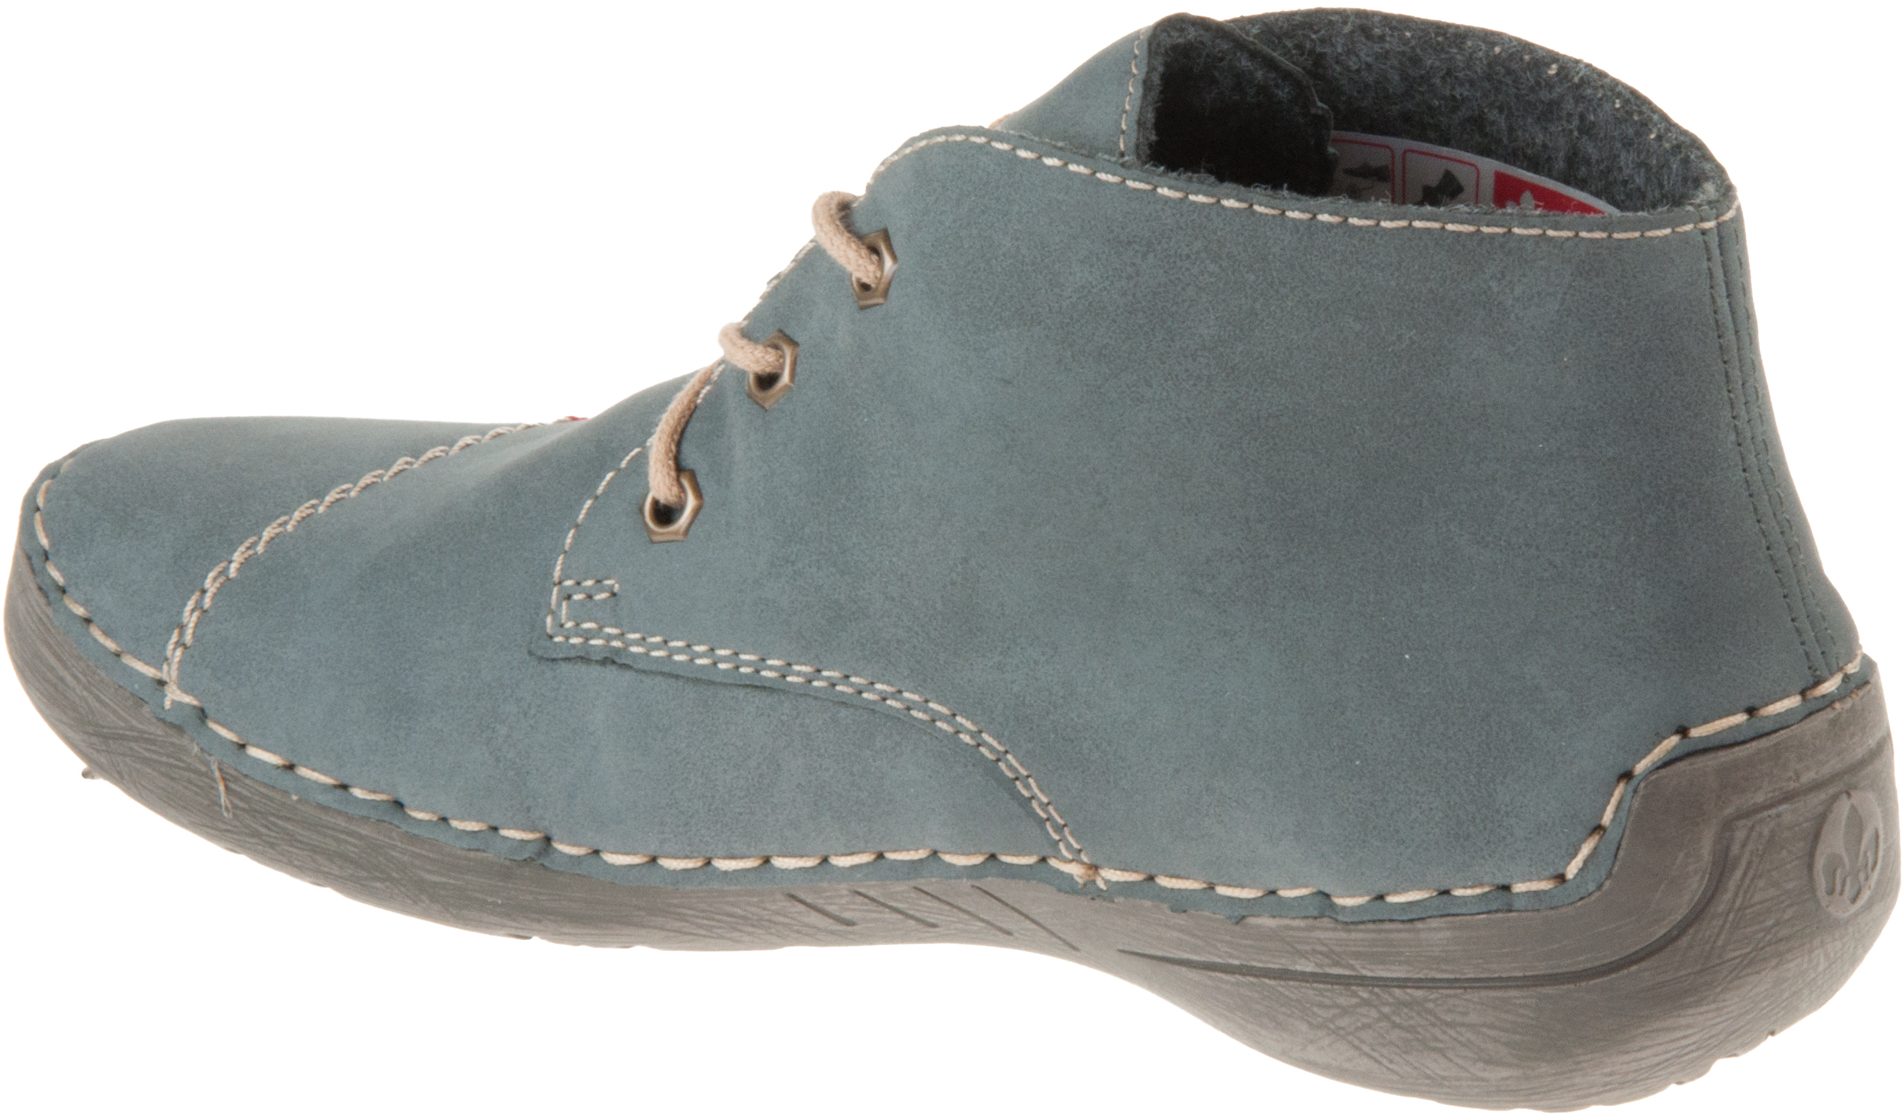 Rieker Angela Boot Ocean Blue 52540-14 - Ankle Boots - Humphries Shoes